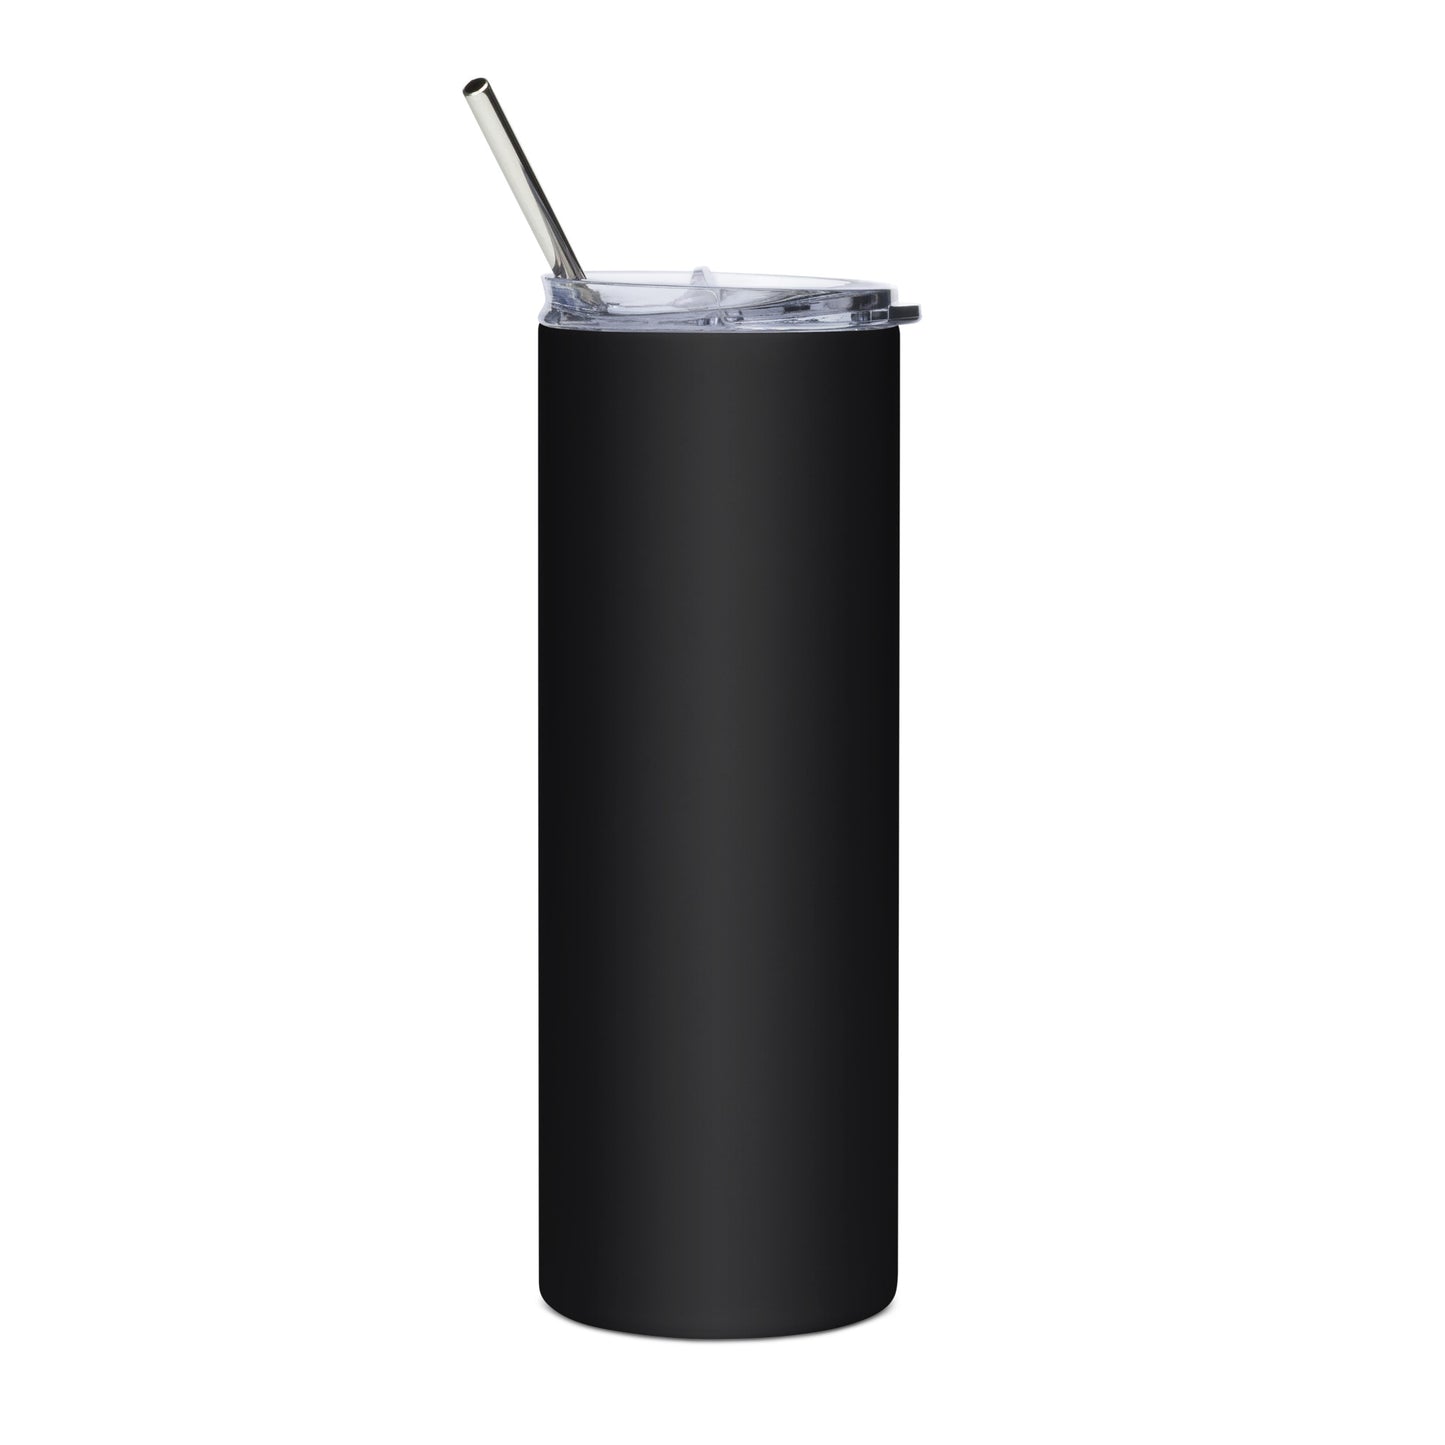 Only Fear the living Stainless steel tumbler